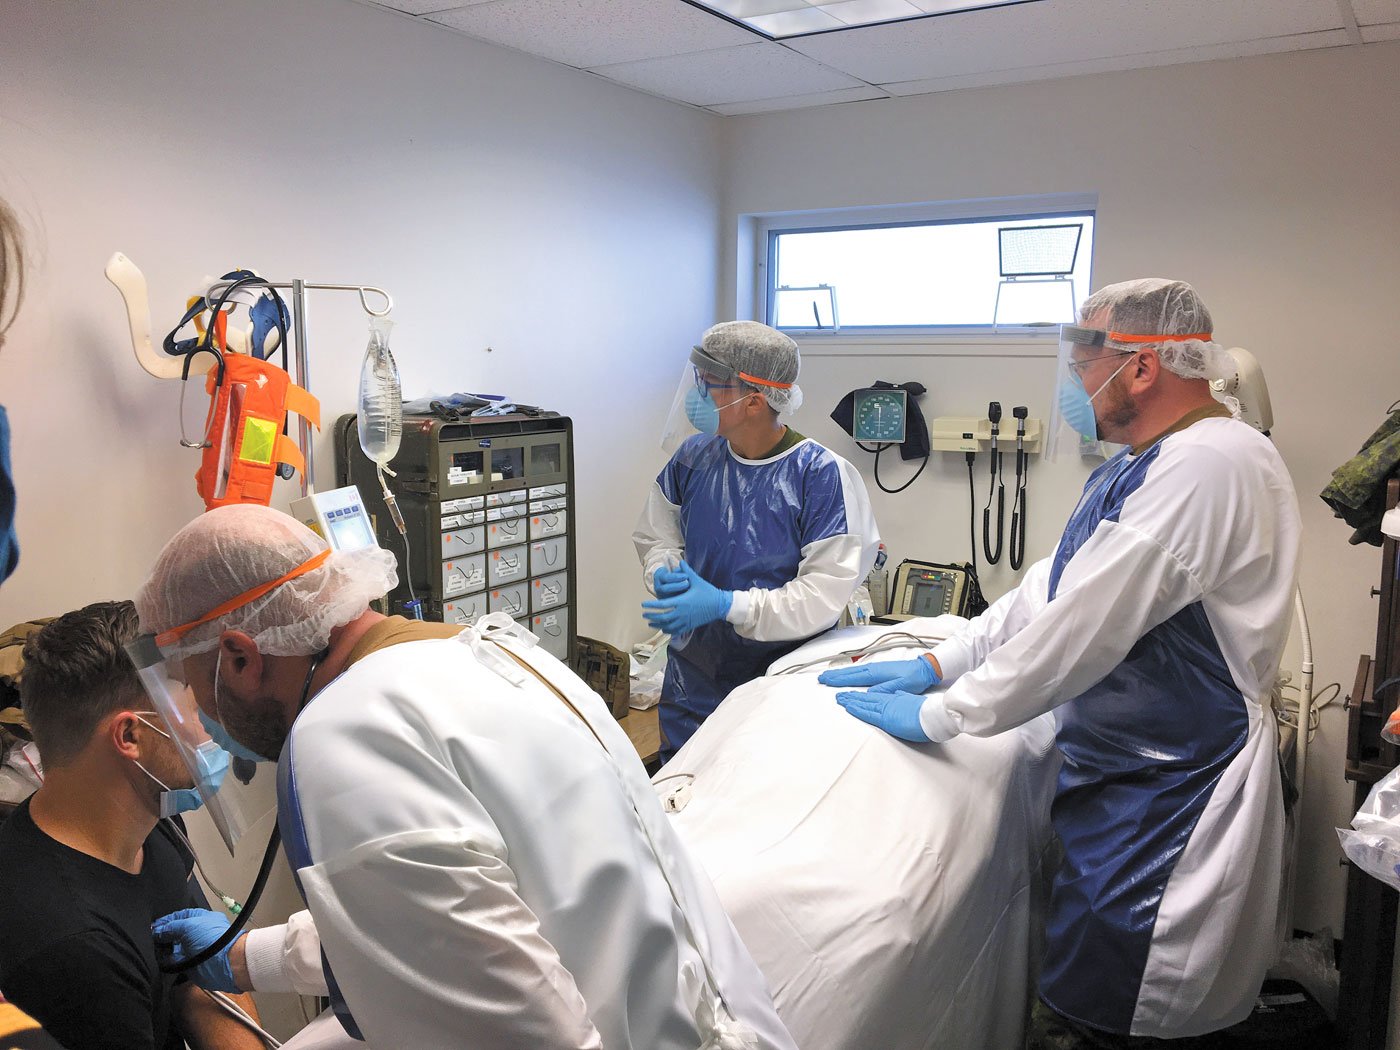 Capt Brown and his team, MCpl Cape and Cpl Smith, assess a patient with possible SARS-CoV-2 symptoms. The team is wearing full Personal Protective Equipment. The combination of a live role player and simulated casualty (mannequin) was used for the training scenarios. The team questioned and examined the role player and then performed required interventions on the mannequin.